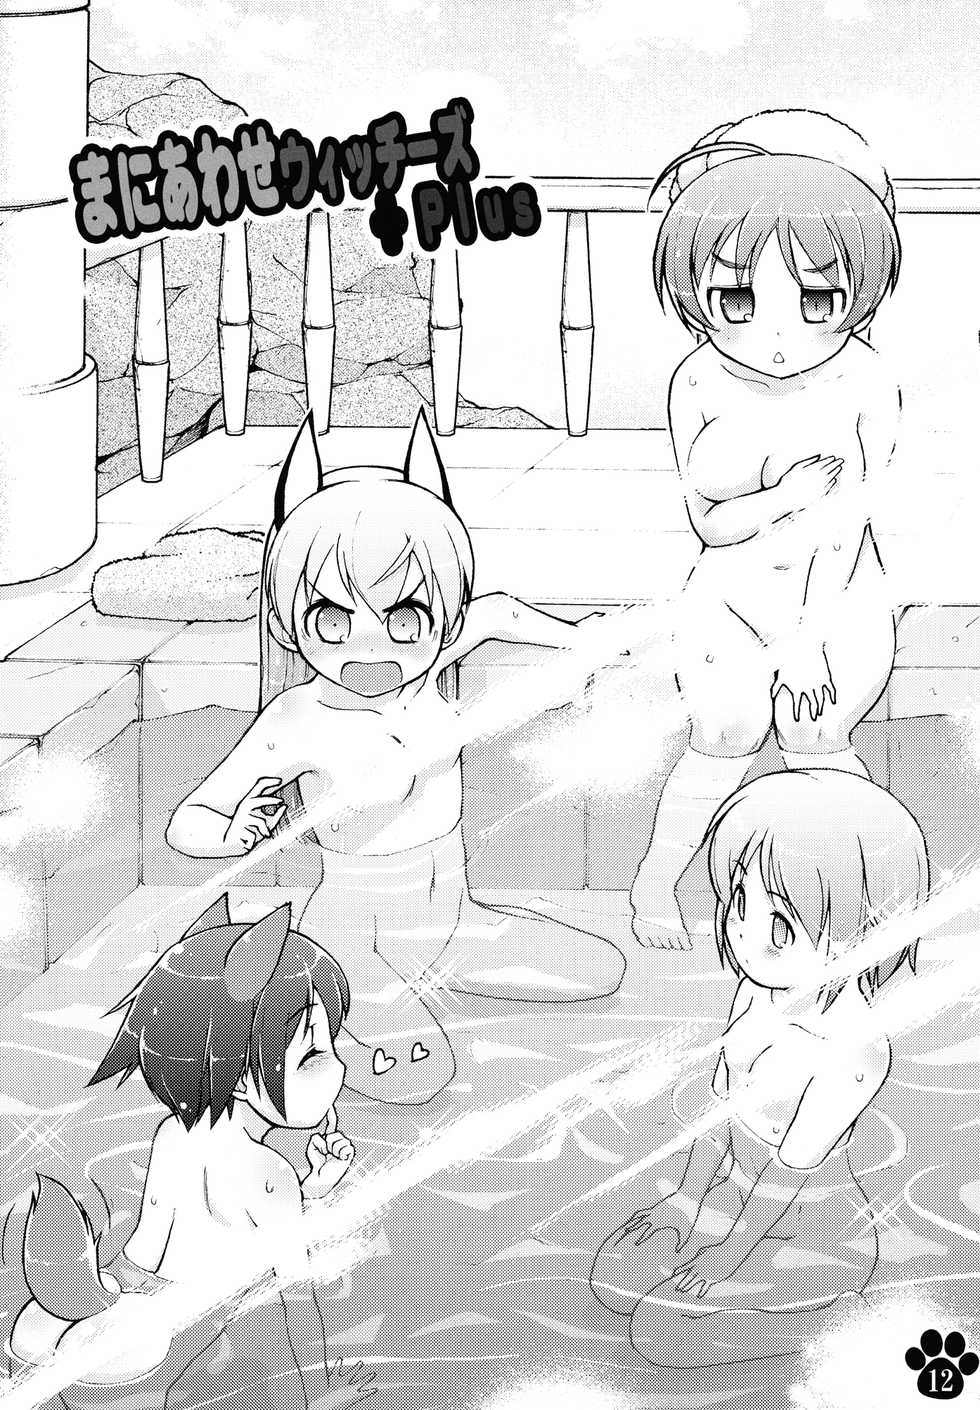 [Colt (LEE)] Maniawase Witches Plus (Strike Witches) [Digital] - Page 12